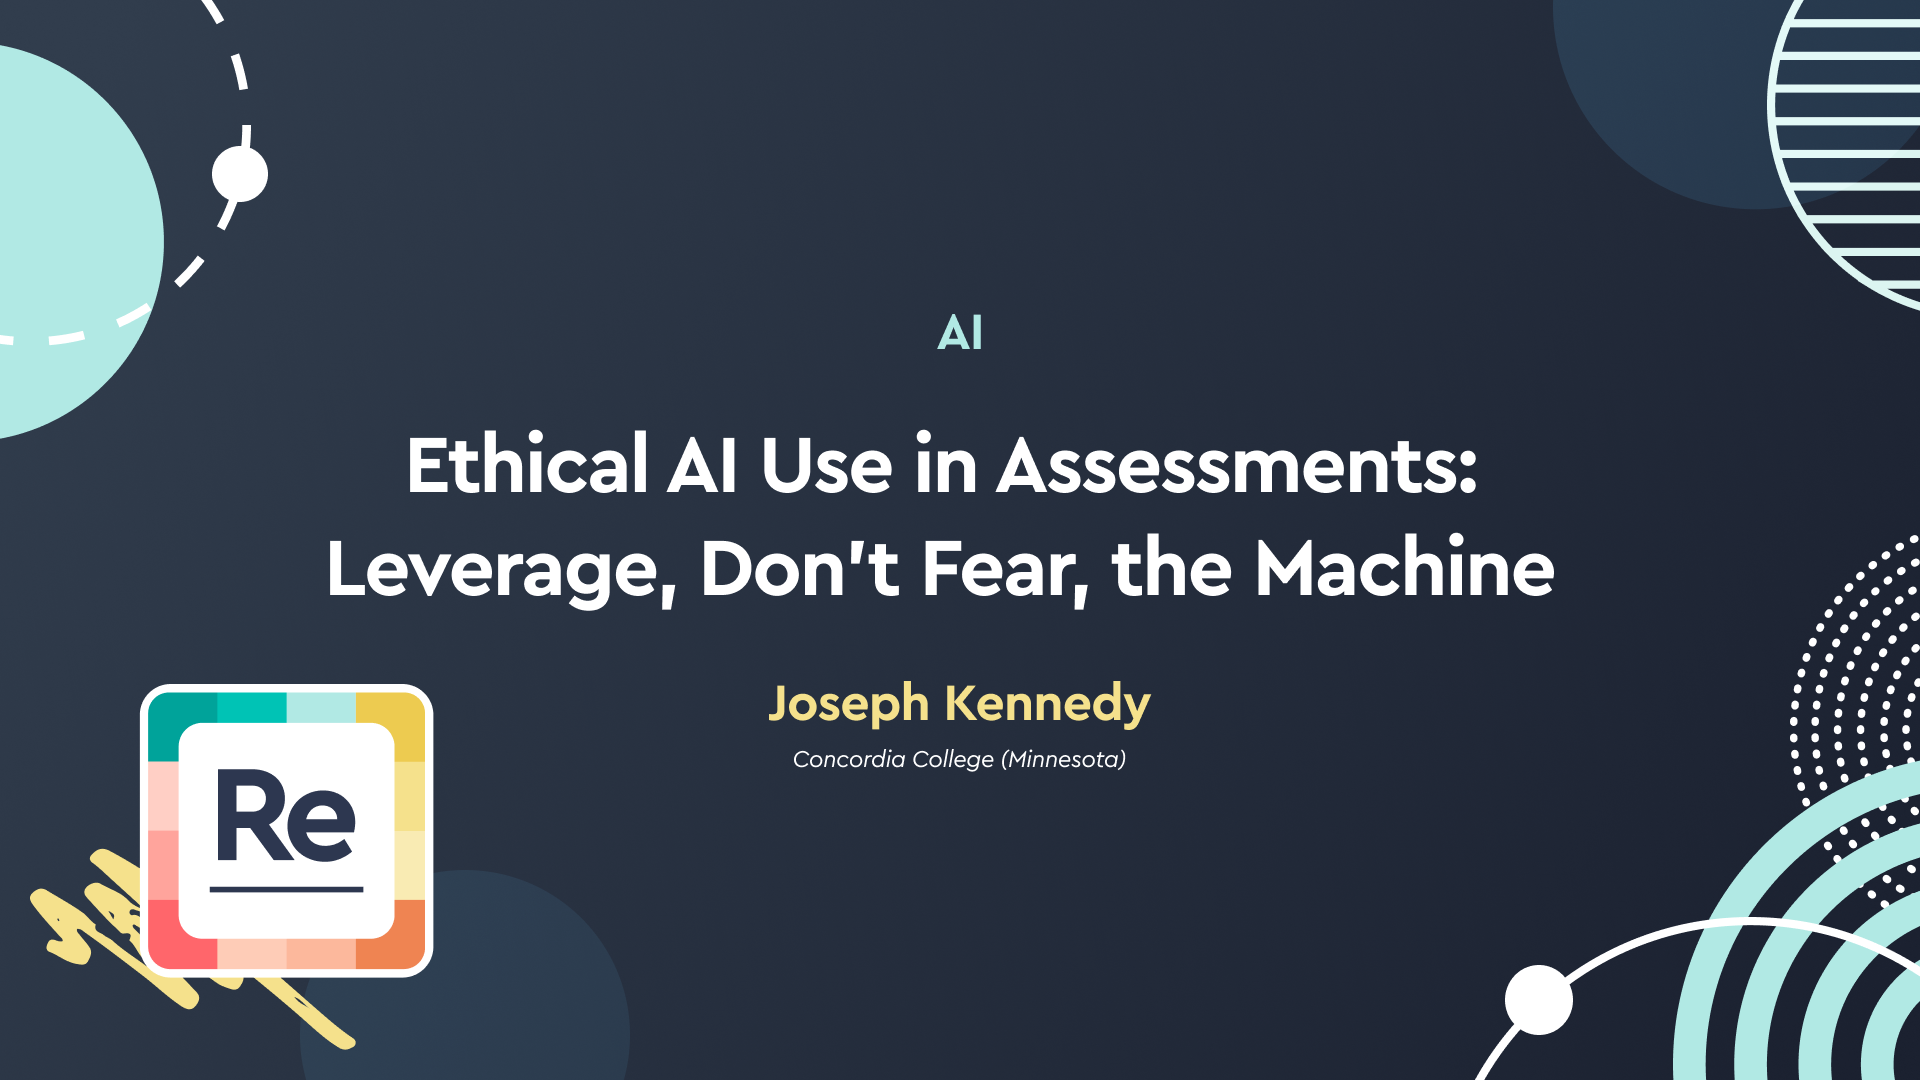 Ethical AI Use in Assessments: Leverage, Don’t Fear, the Machine